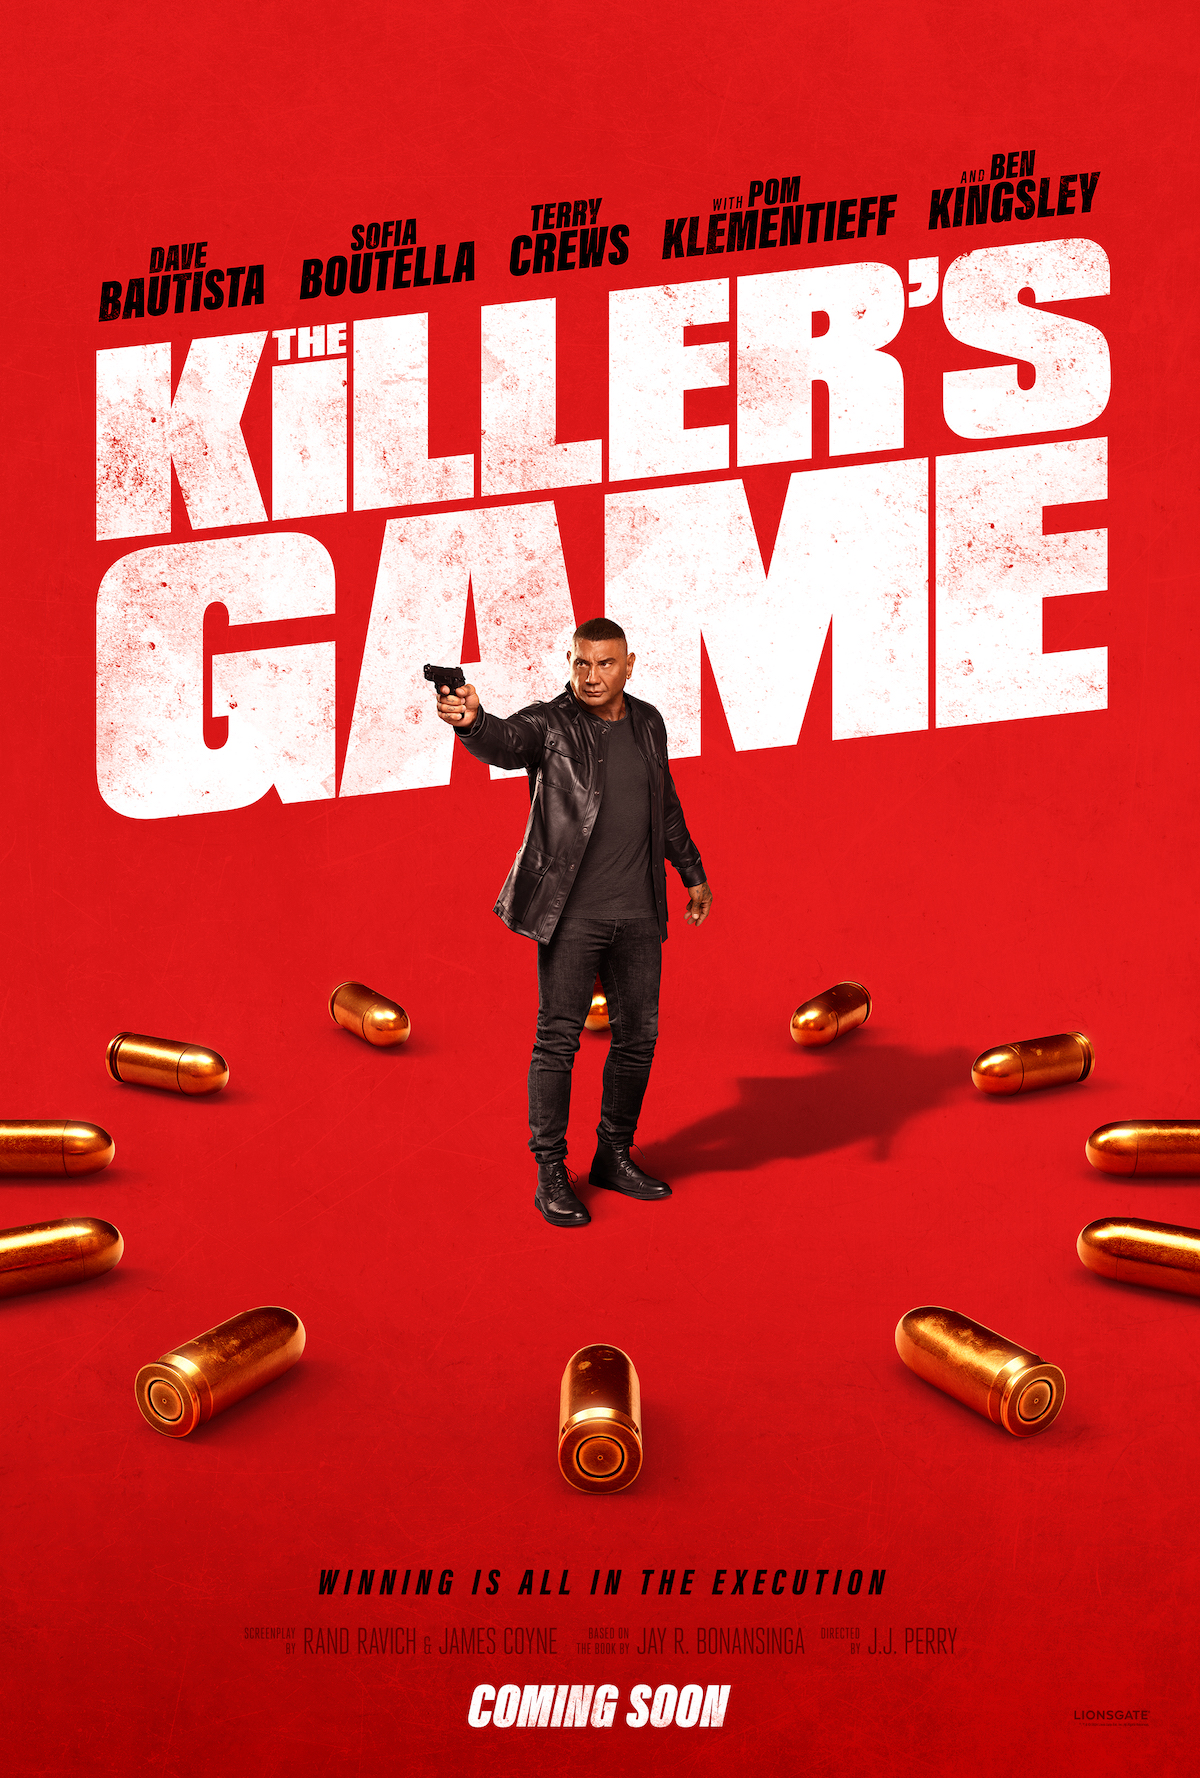 <div>Winning Is All In The Execution: Dave Bautista, Sofia Boutella & Terry Crews Star In The Action-Packed Trailer Of ‘The Killer’s Game’ + First Look Images</div>